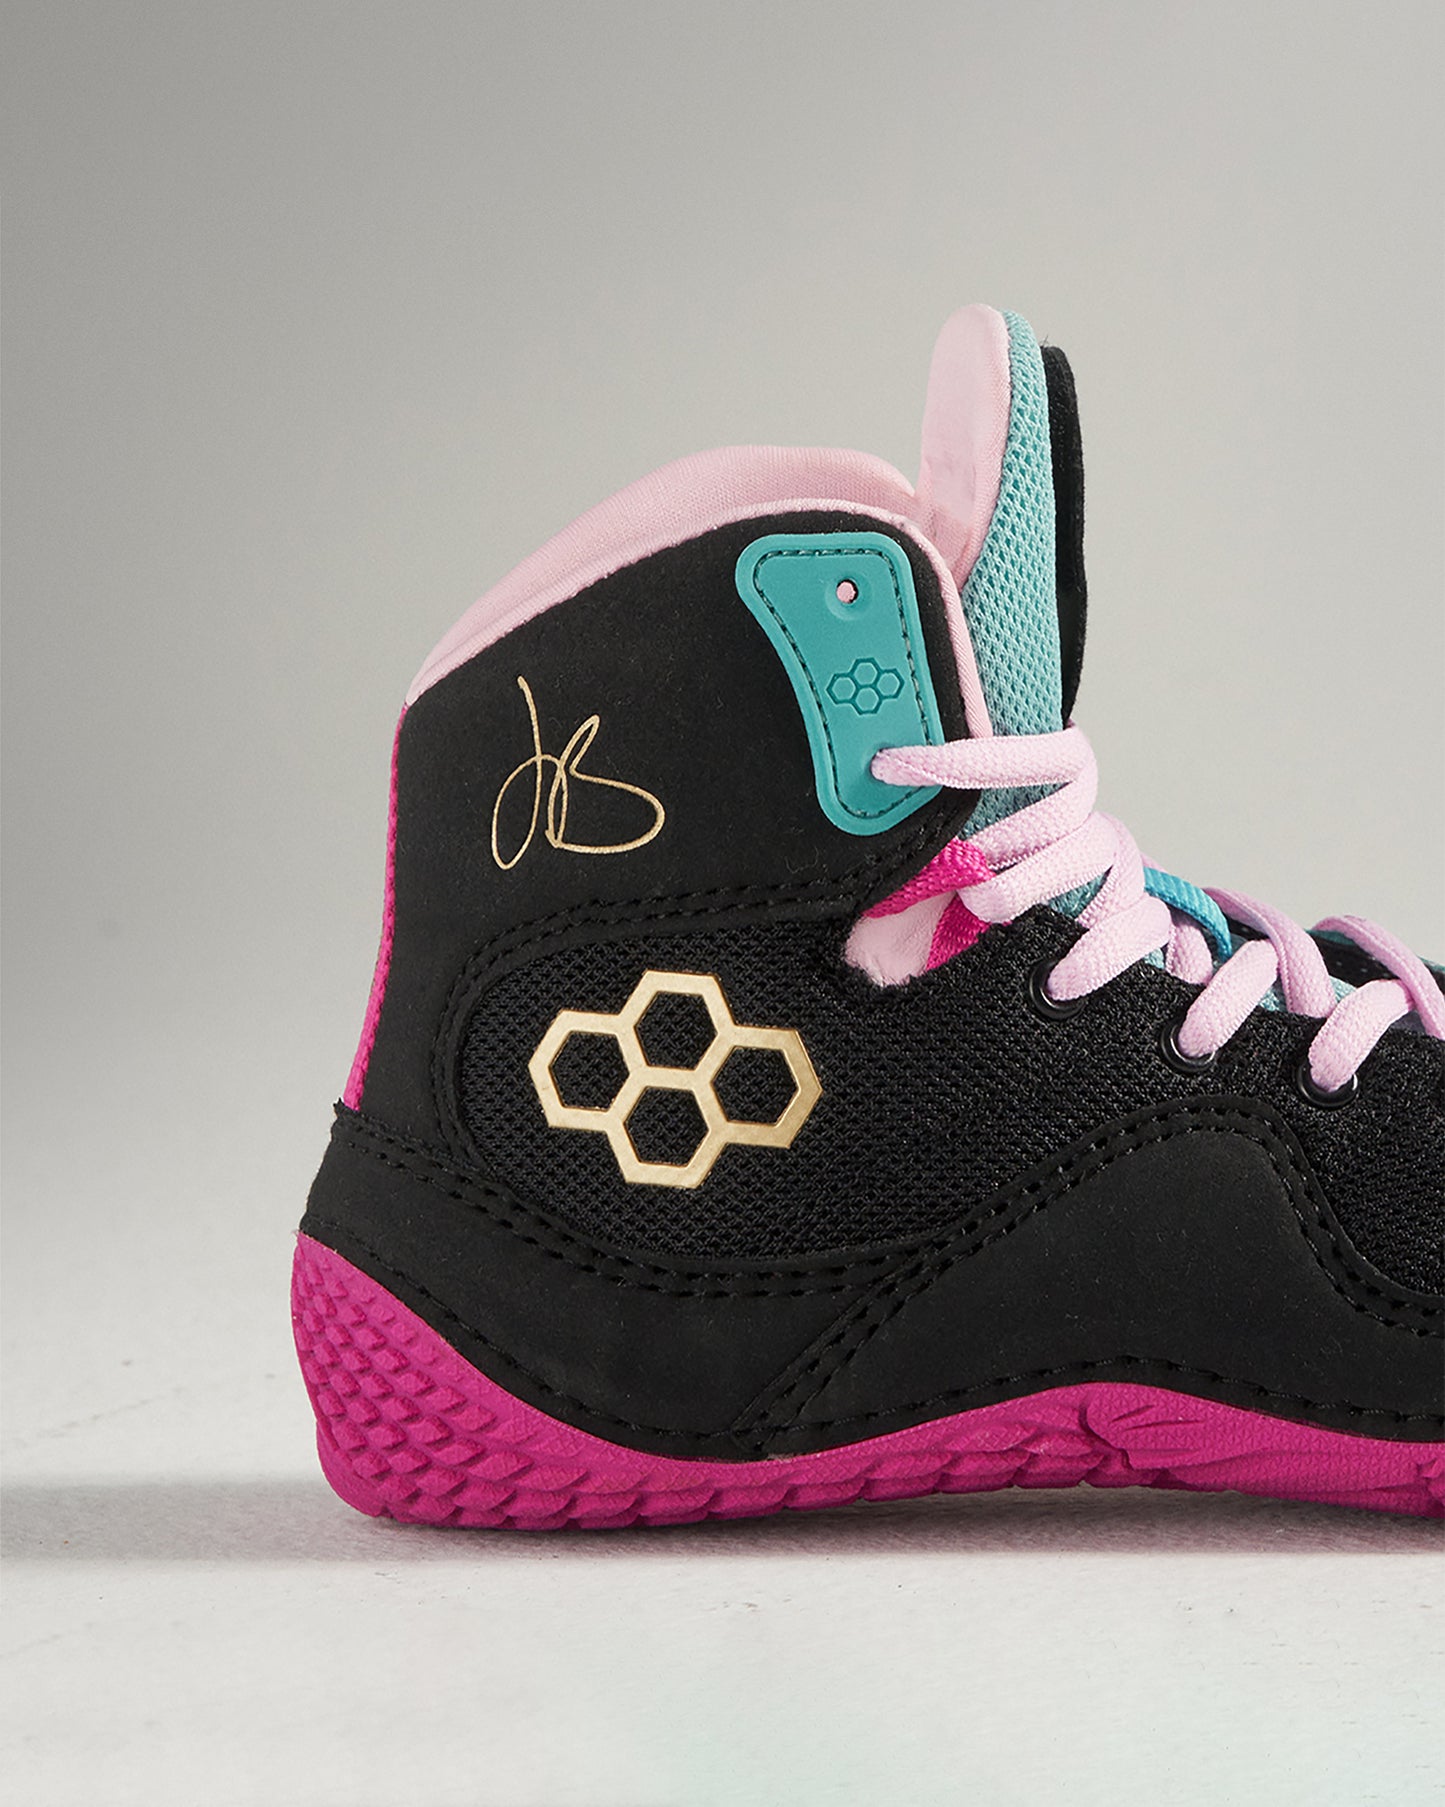 JB1 Youth Wrestling Shoes - Miami